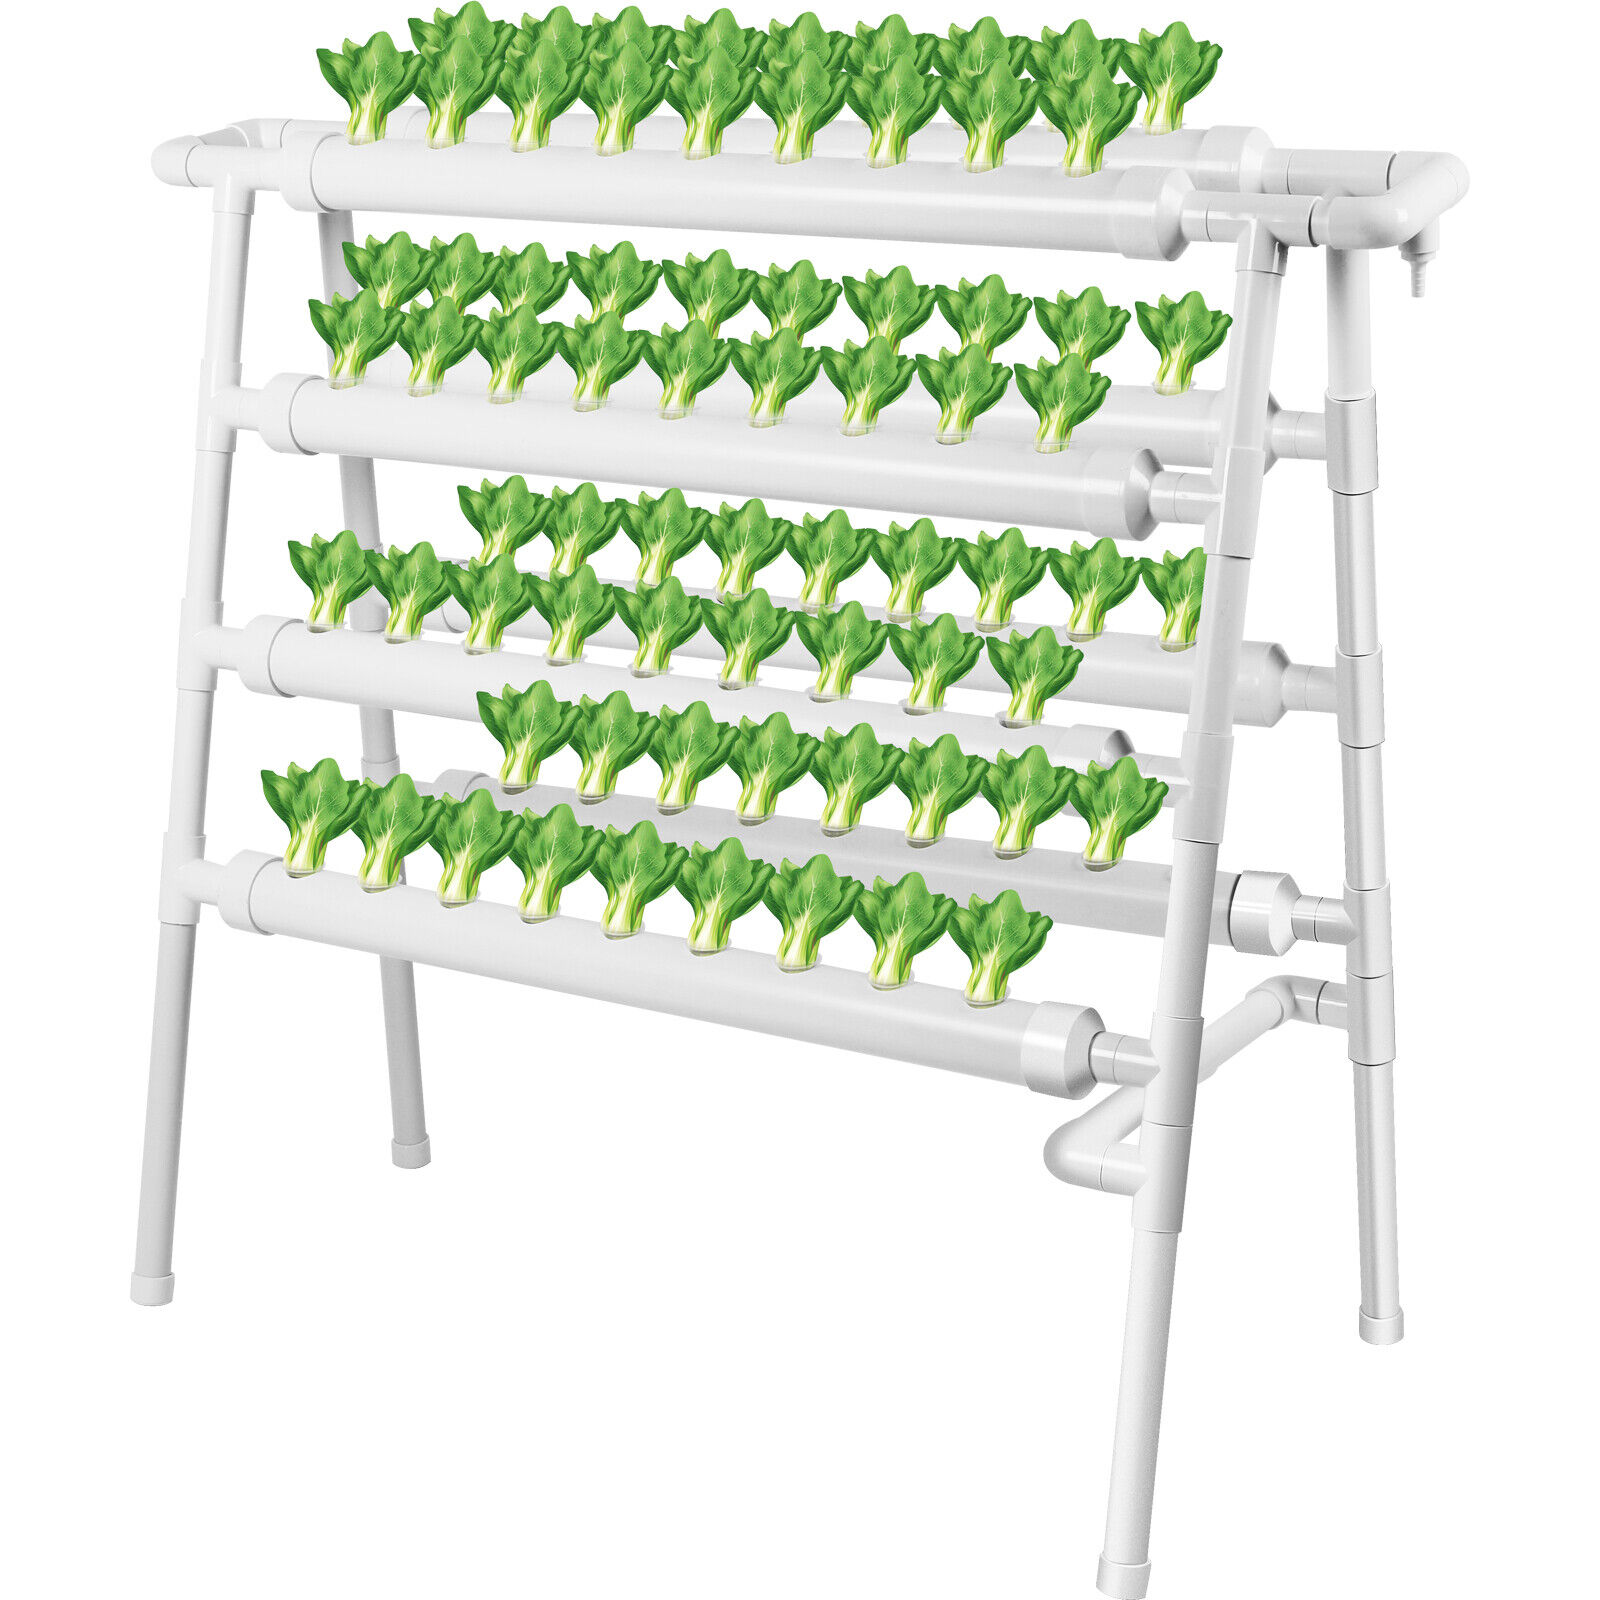 72 Holes 2 Layers 8 Pipes Hydroponic Grow Kit , PVC Hydroponics Growing System